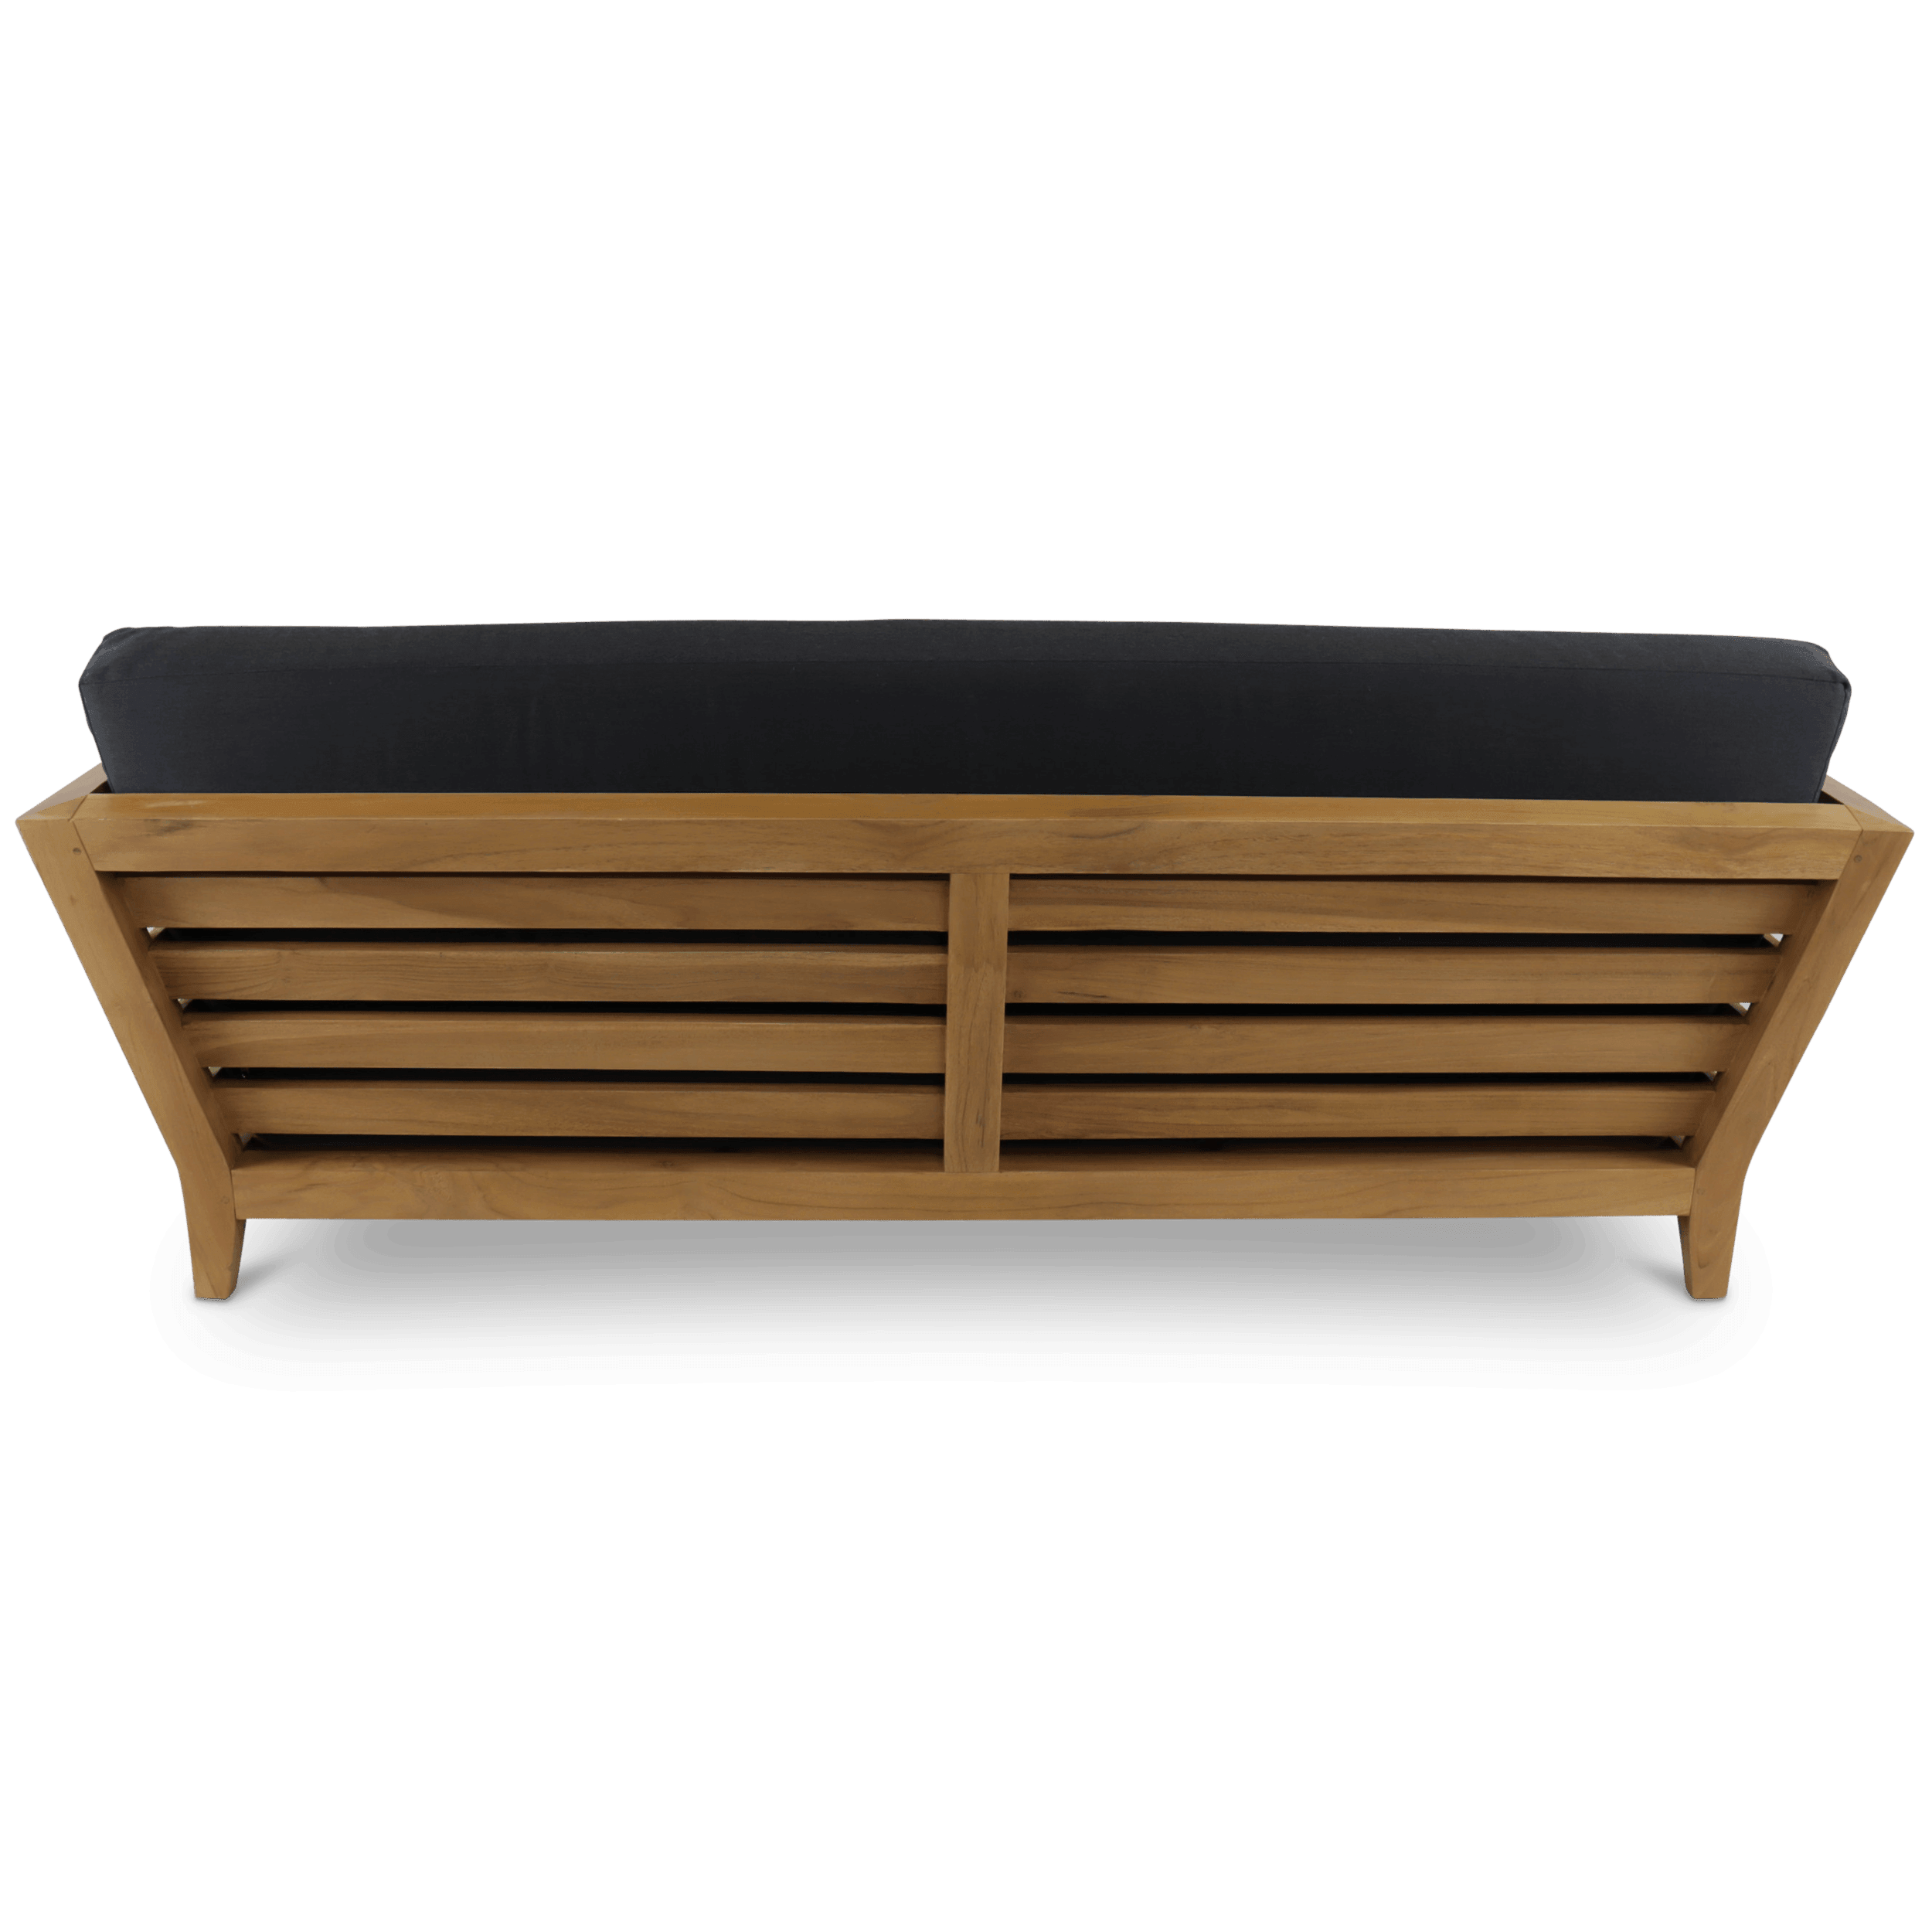 Daintree 3 Seater in Premium Natural Teak and Midnight Sunproof All Weather Fabric - The Furniture Shack